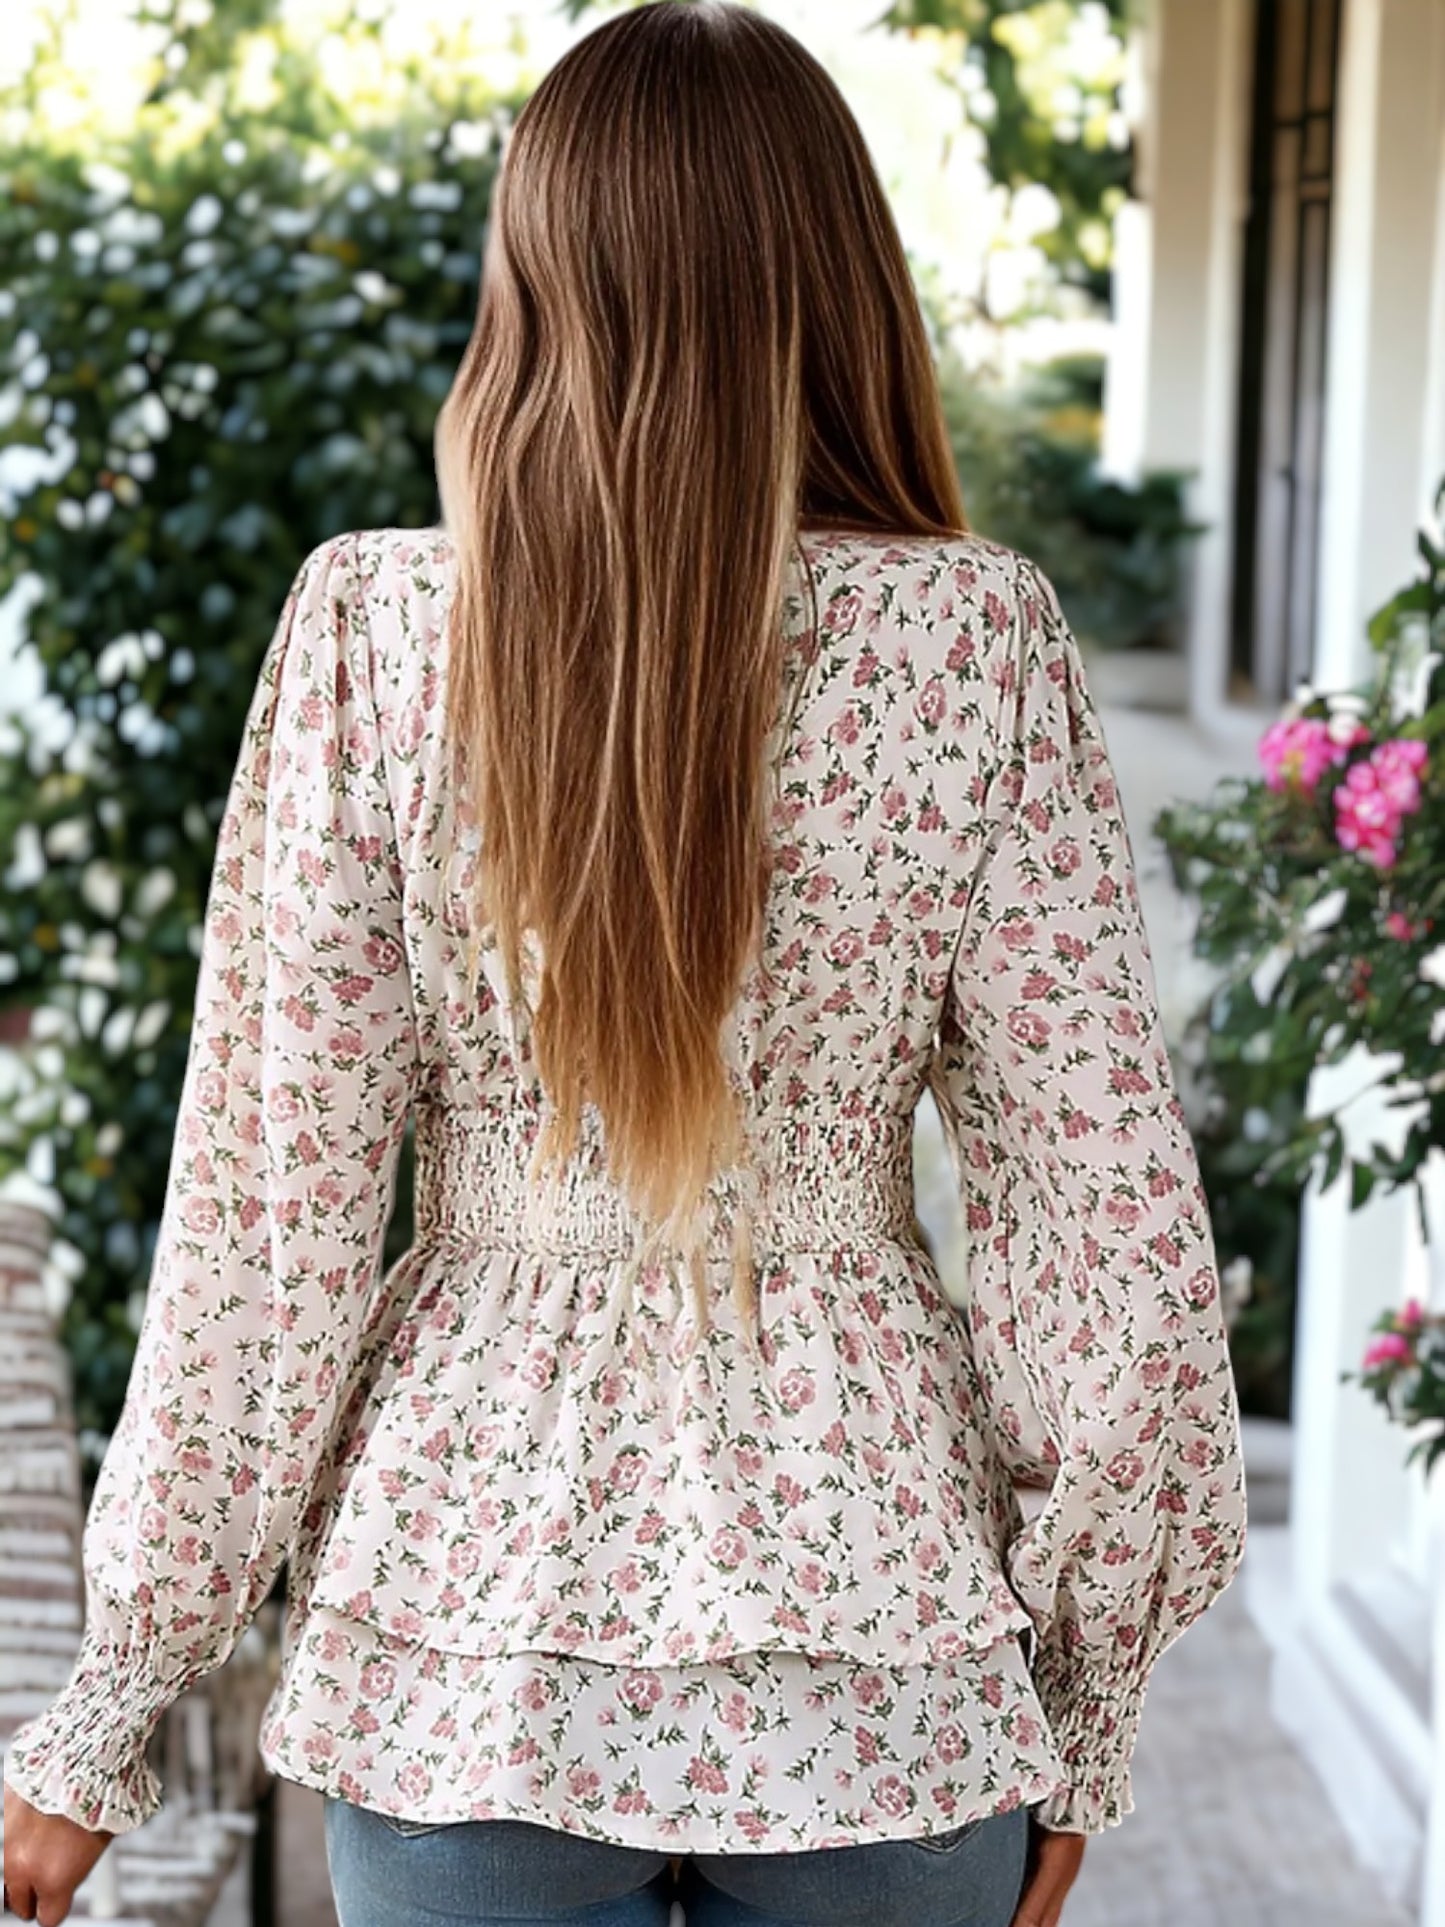 Floral Print Tiered Peplum Blouse